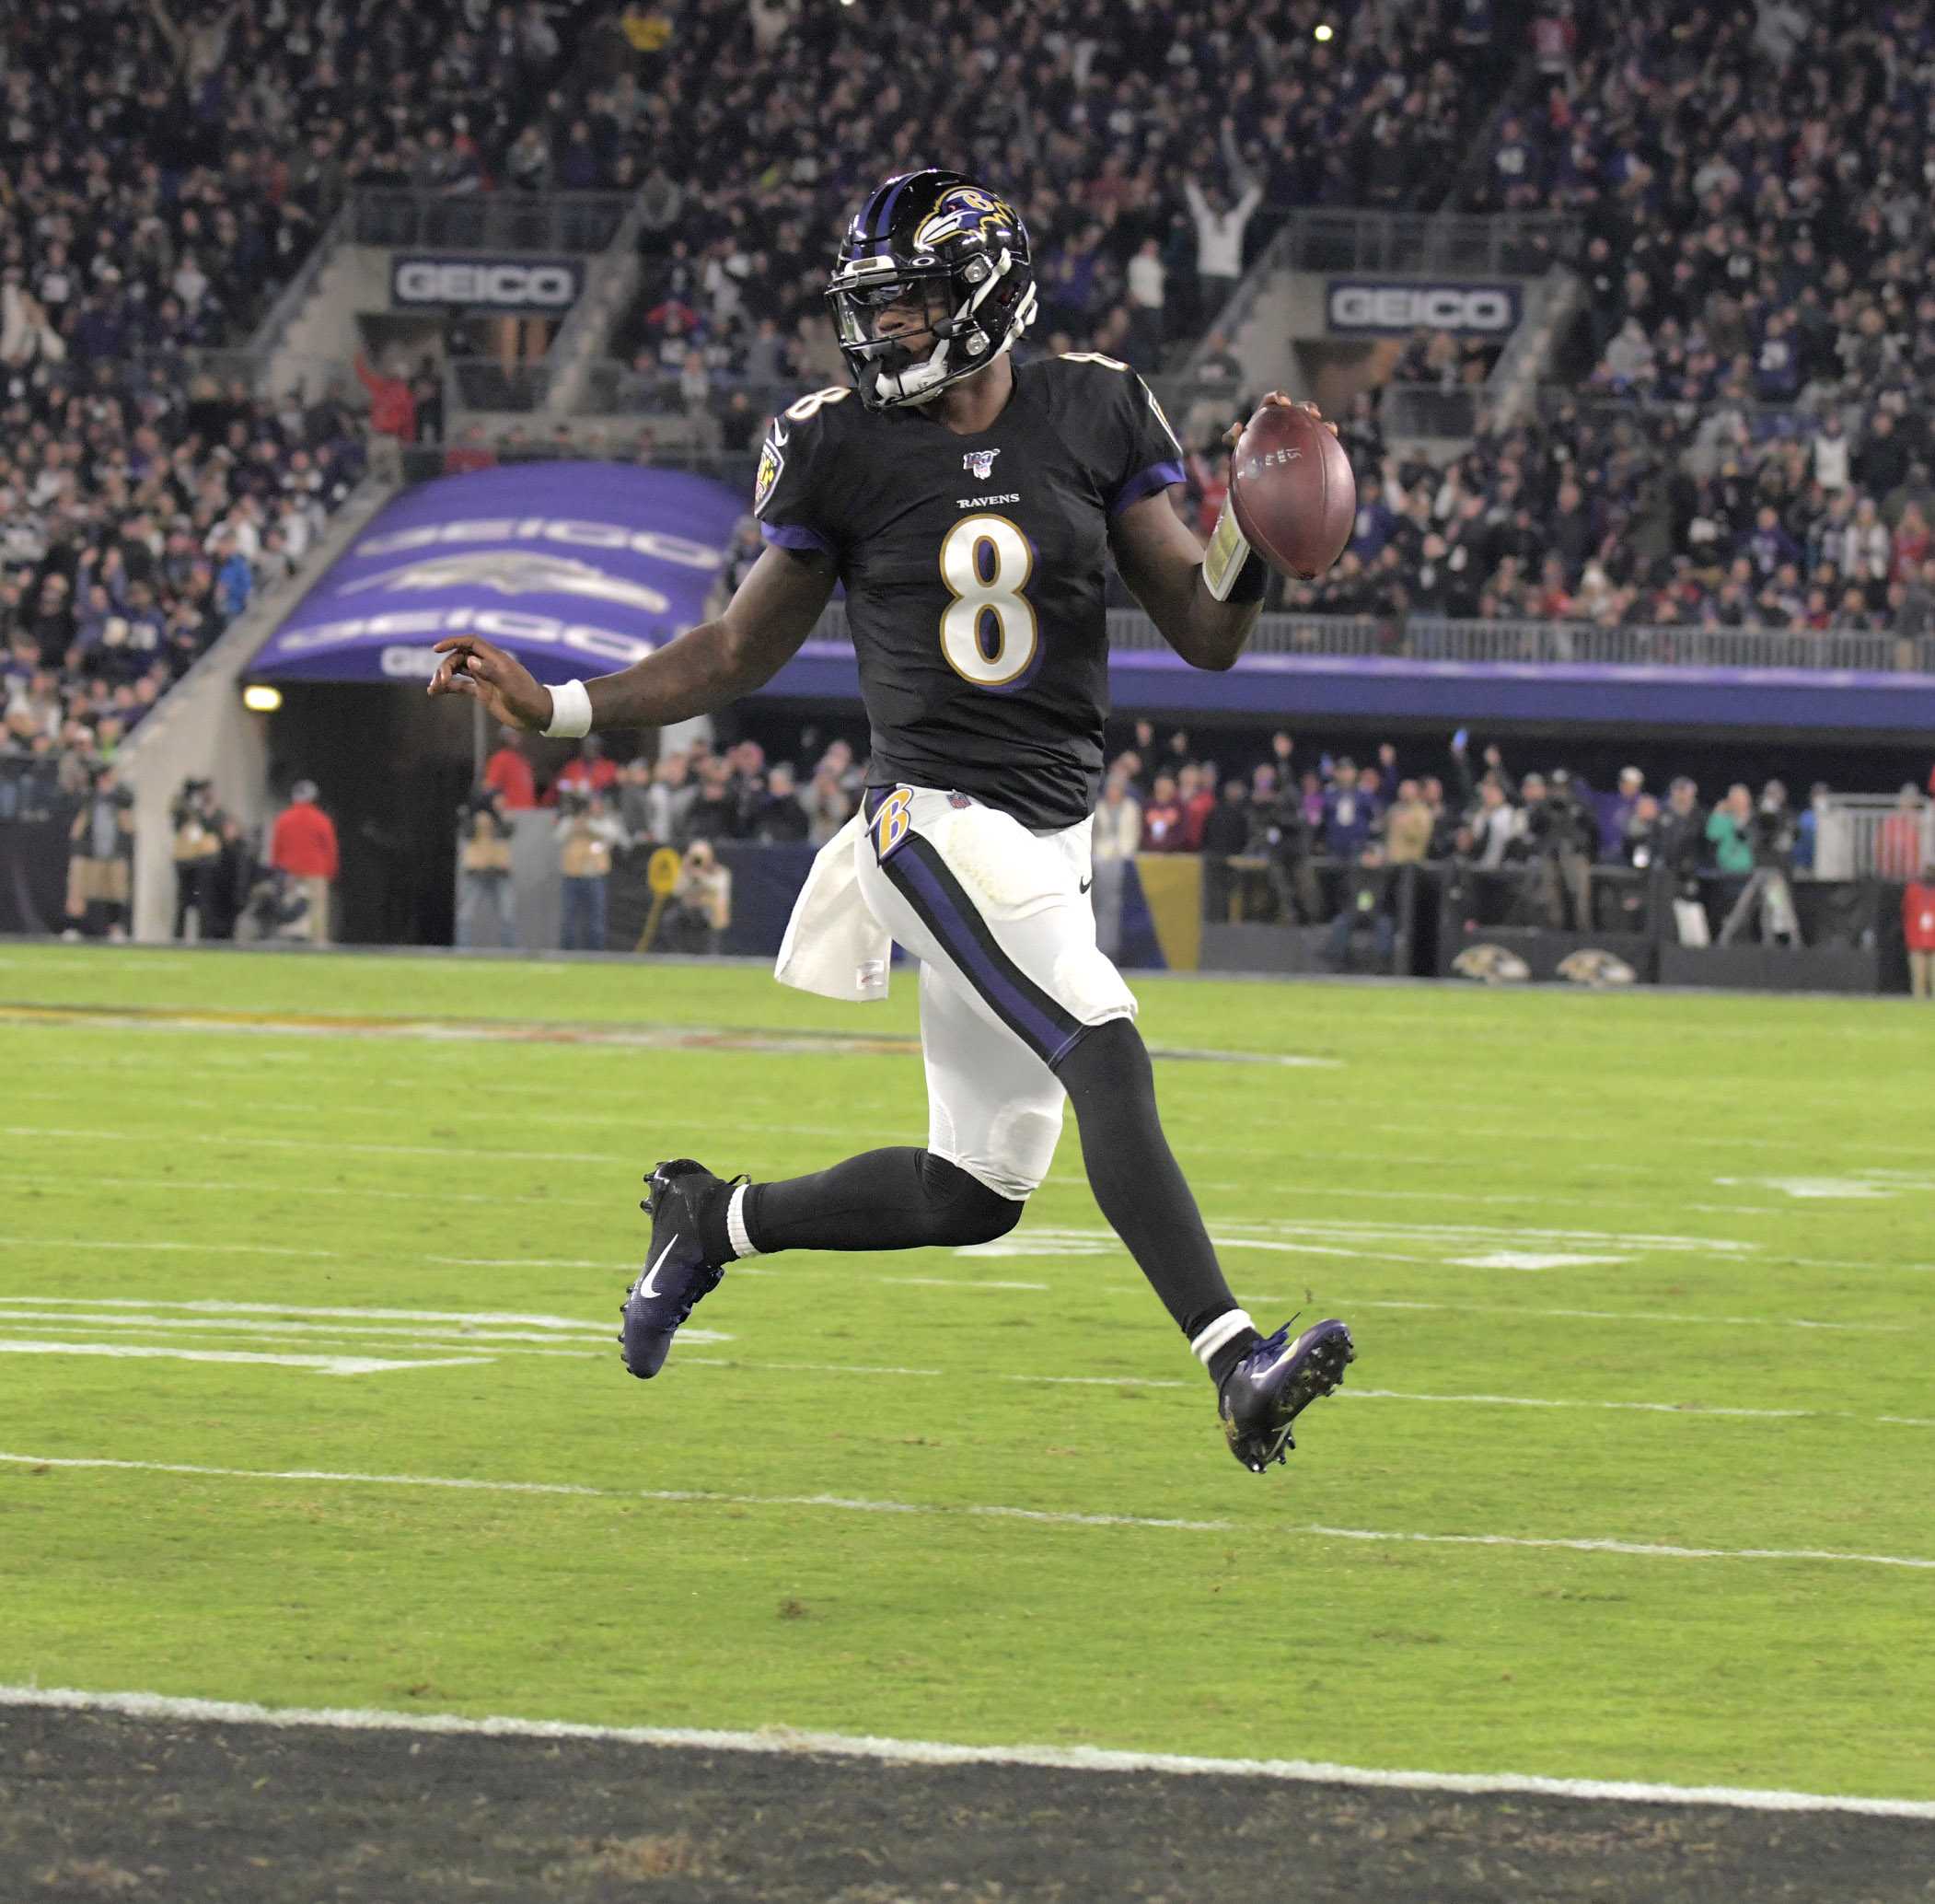 Ravens #8, Lamar Jackson, runs in for a score against the New England Patriots in the first half at M&T Bank Stadium on November 3, 2019.